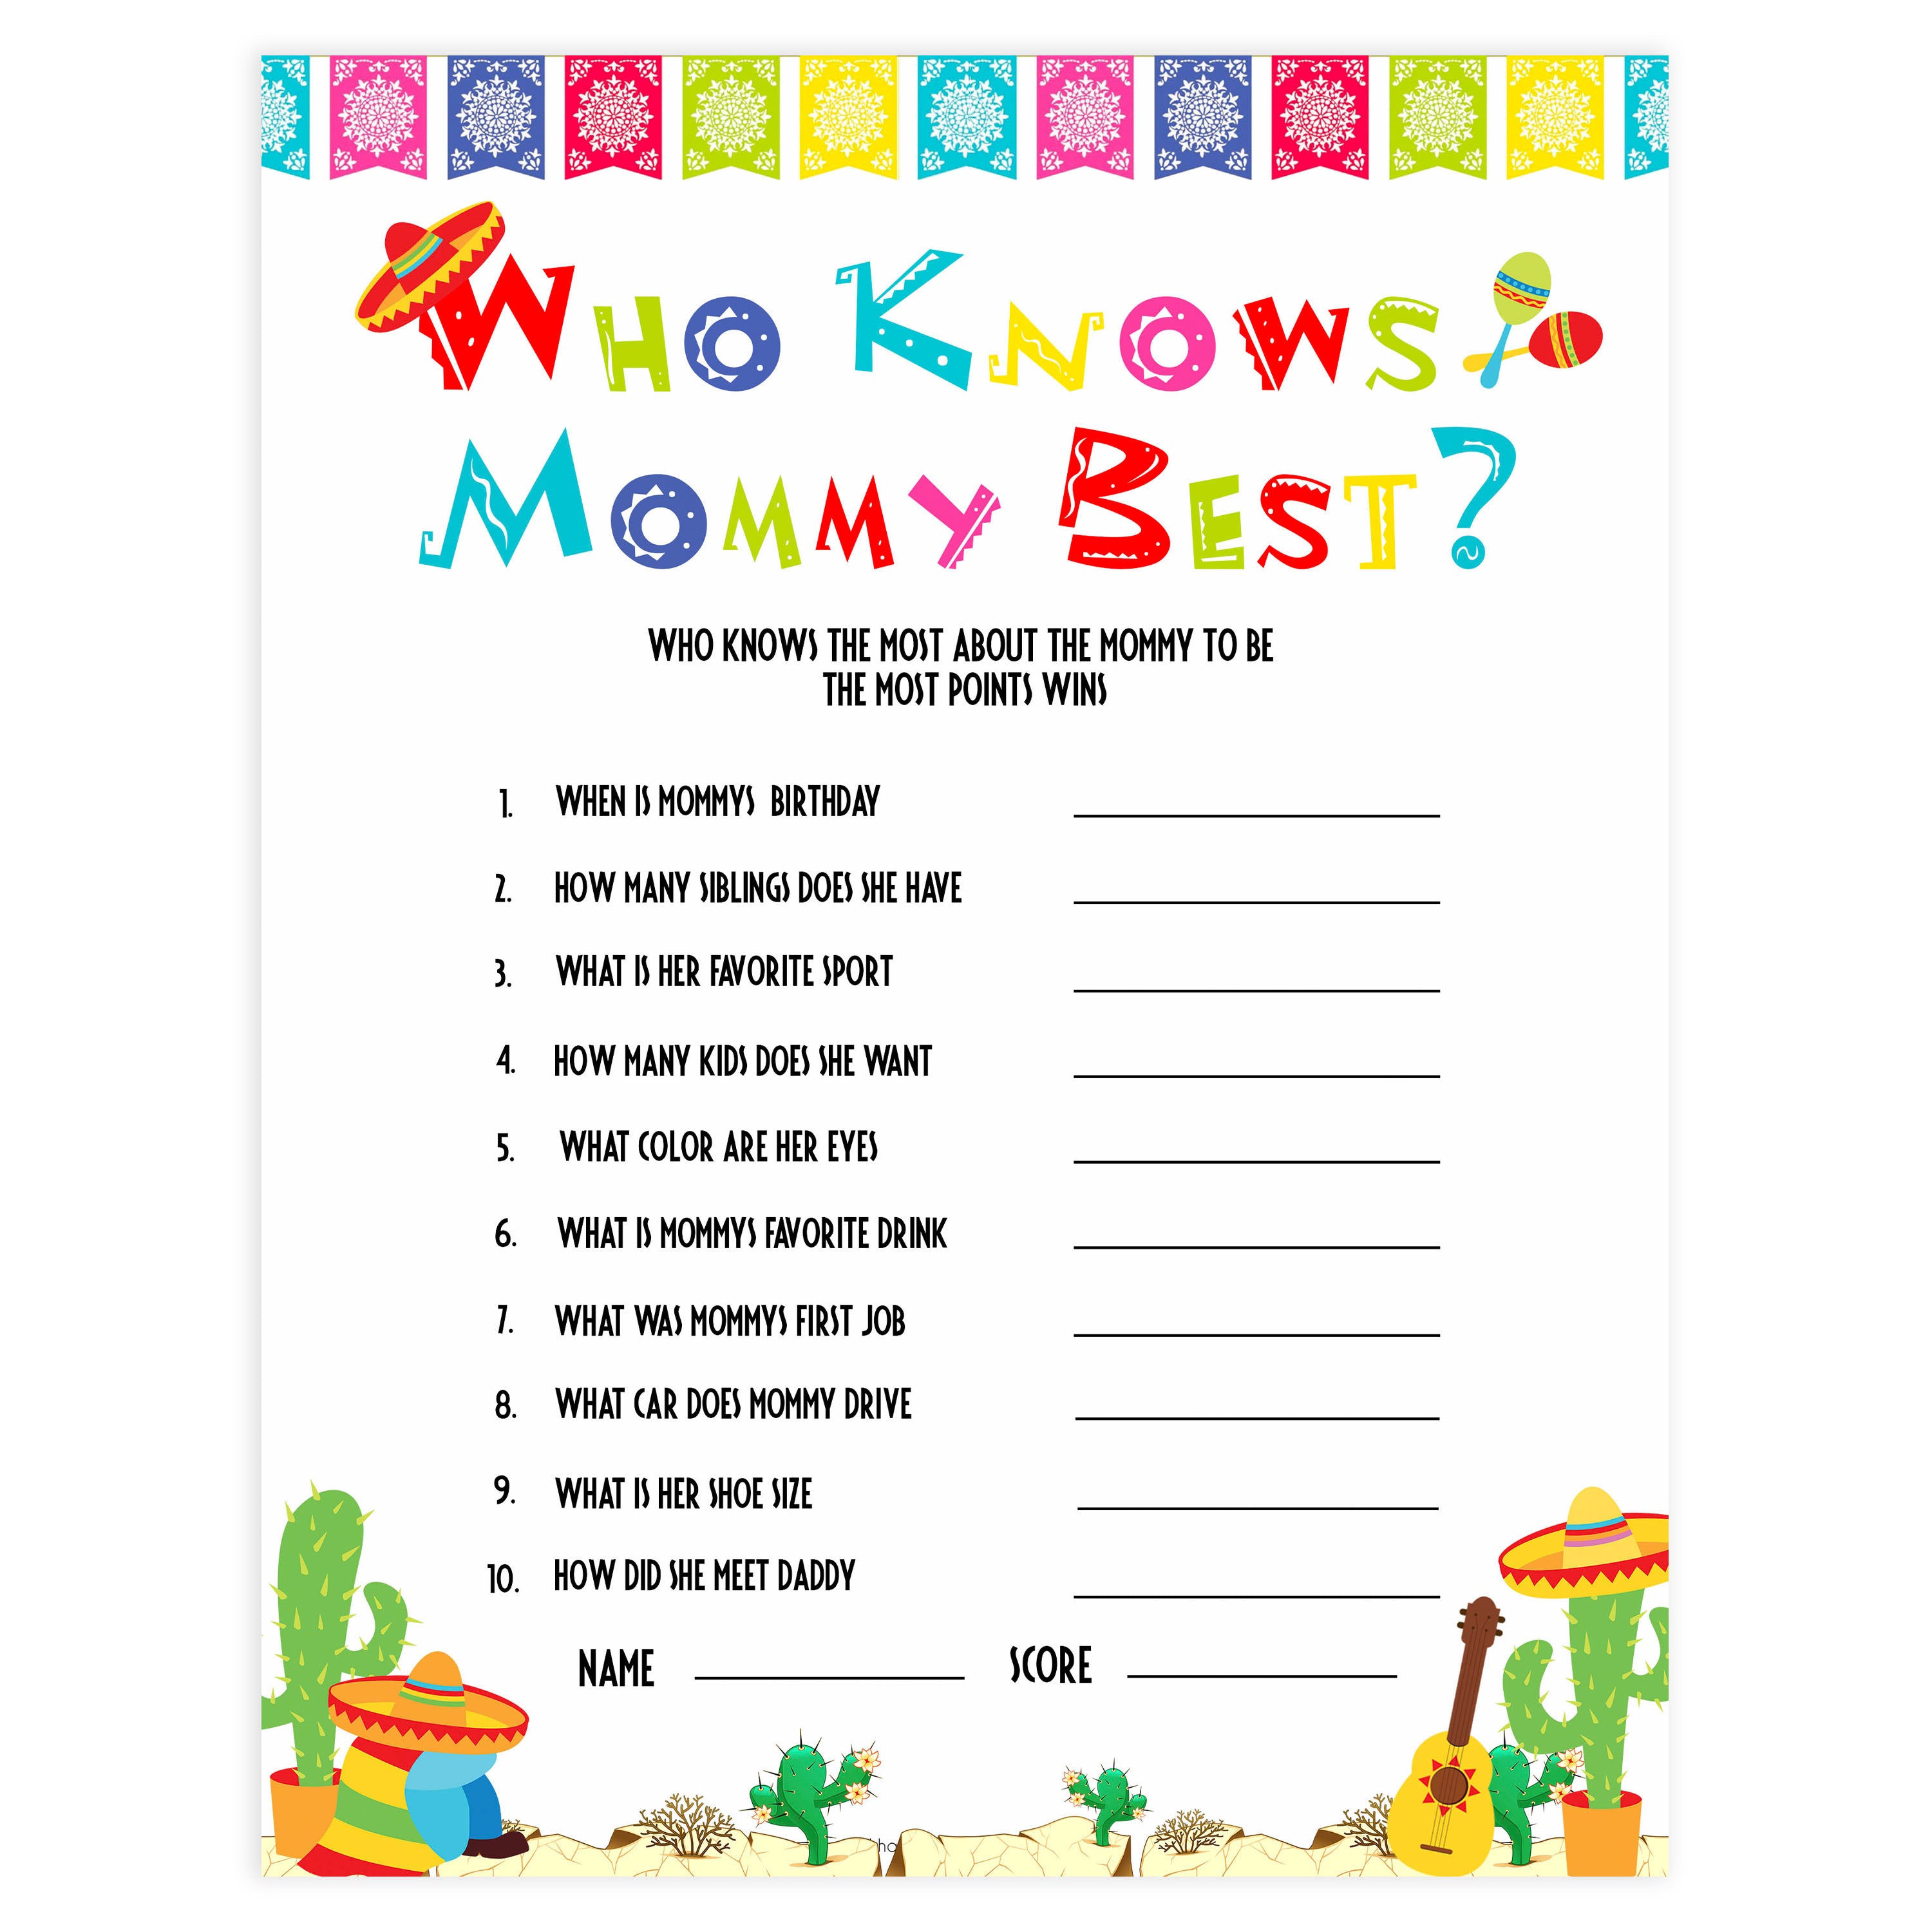 who knows mommy best game, Printable baby shower games, Mexican fiesta fun baby games, baby shower games, fun baby shower ideas, top baby shower ideas, fiesta shower baby shower, fiesta baby shower ideas